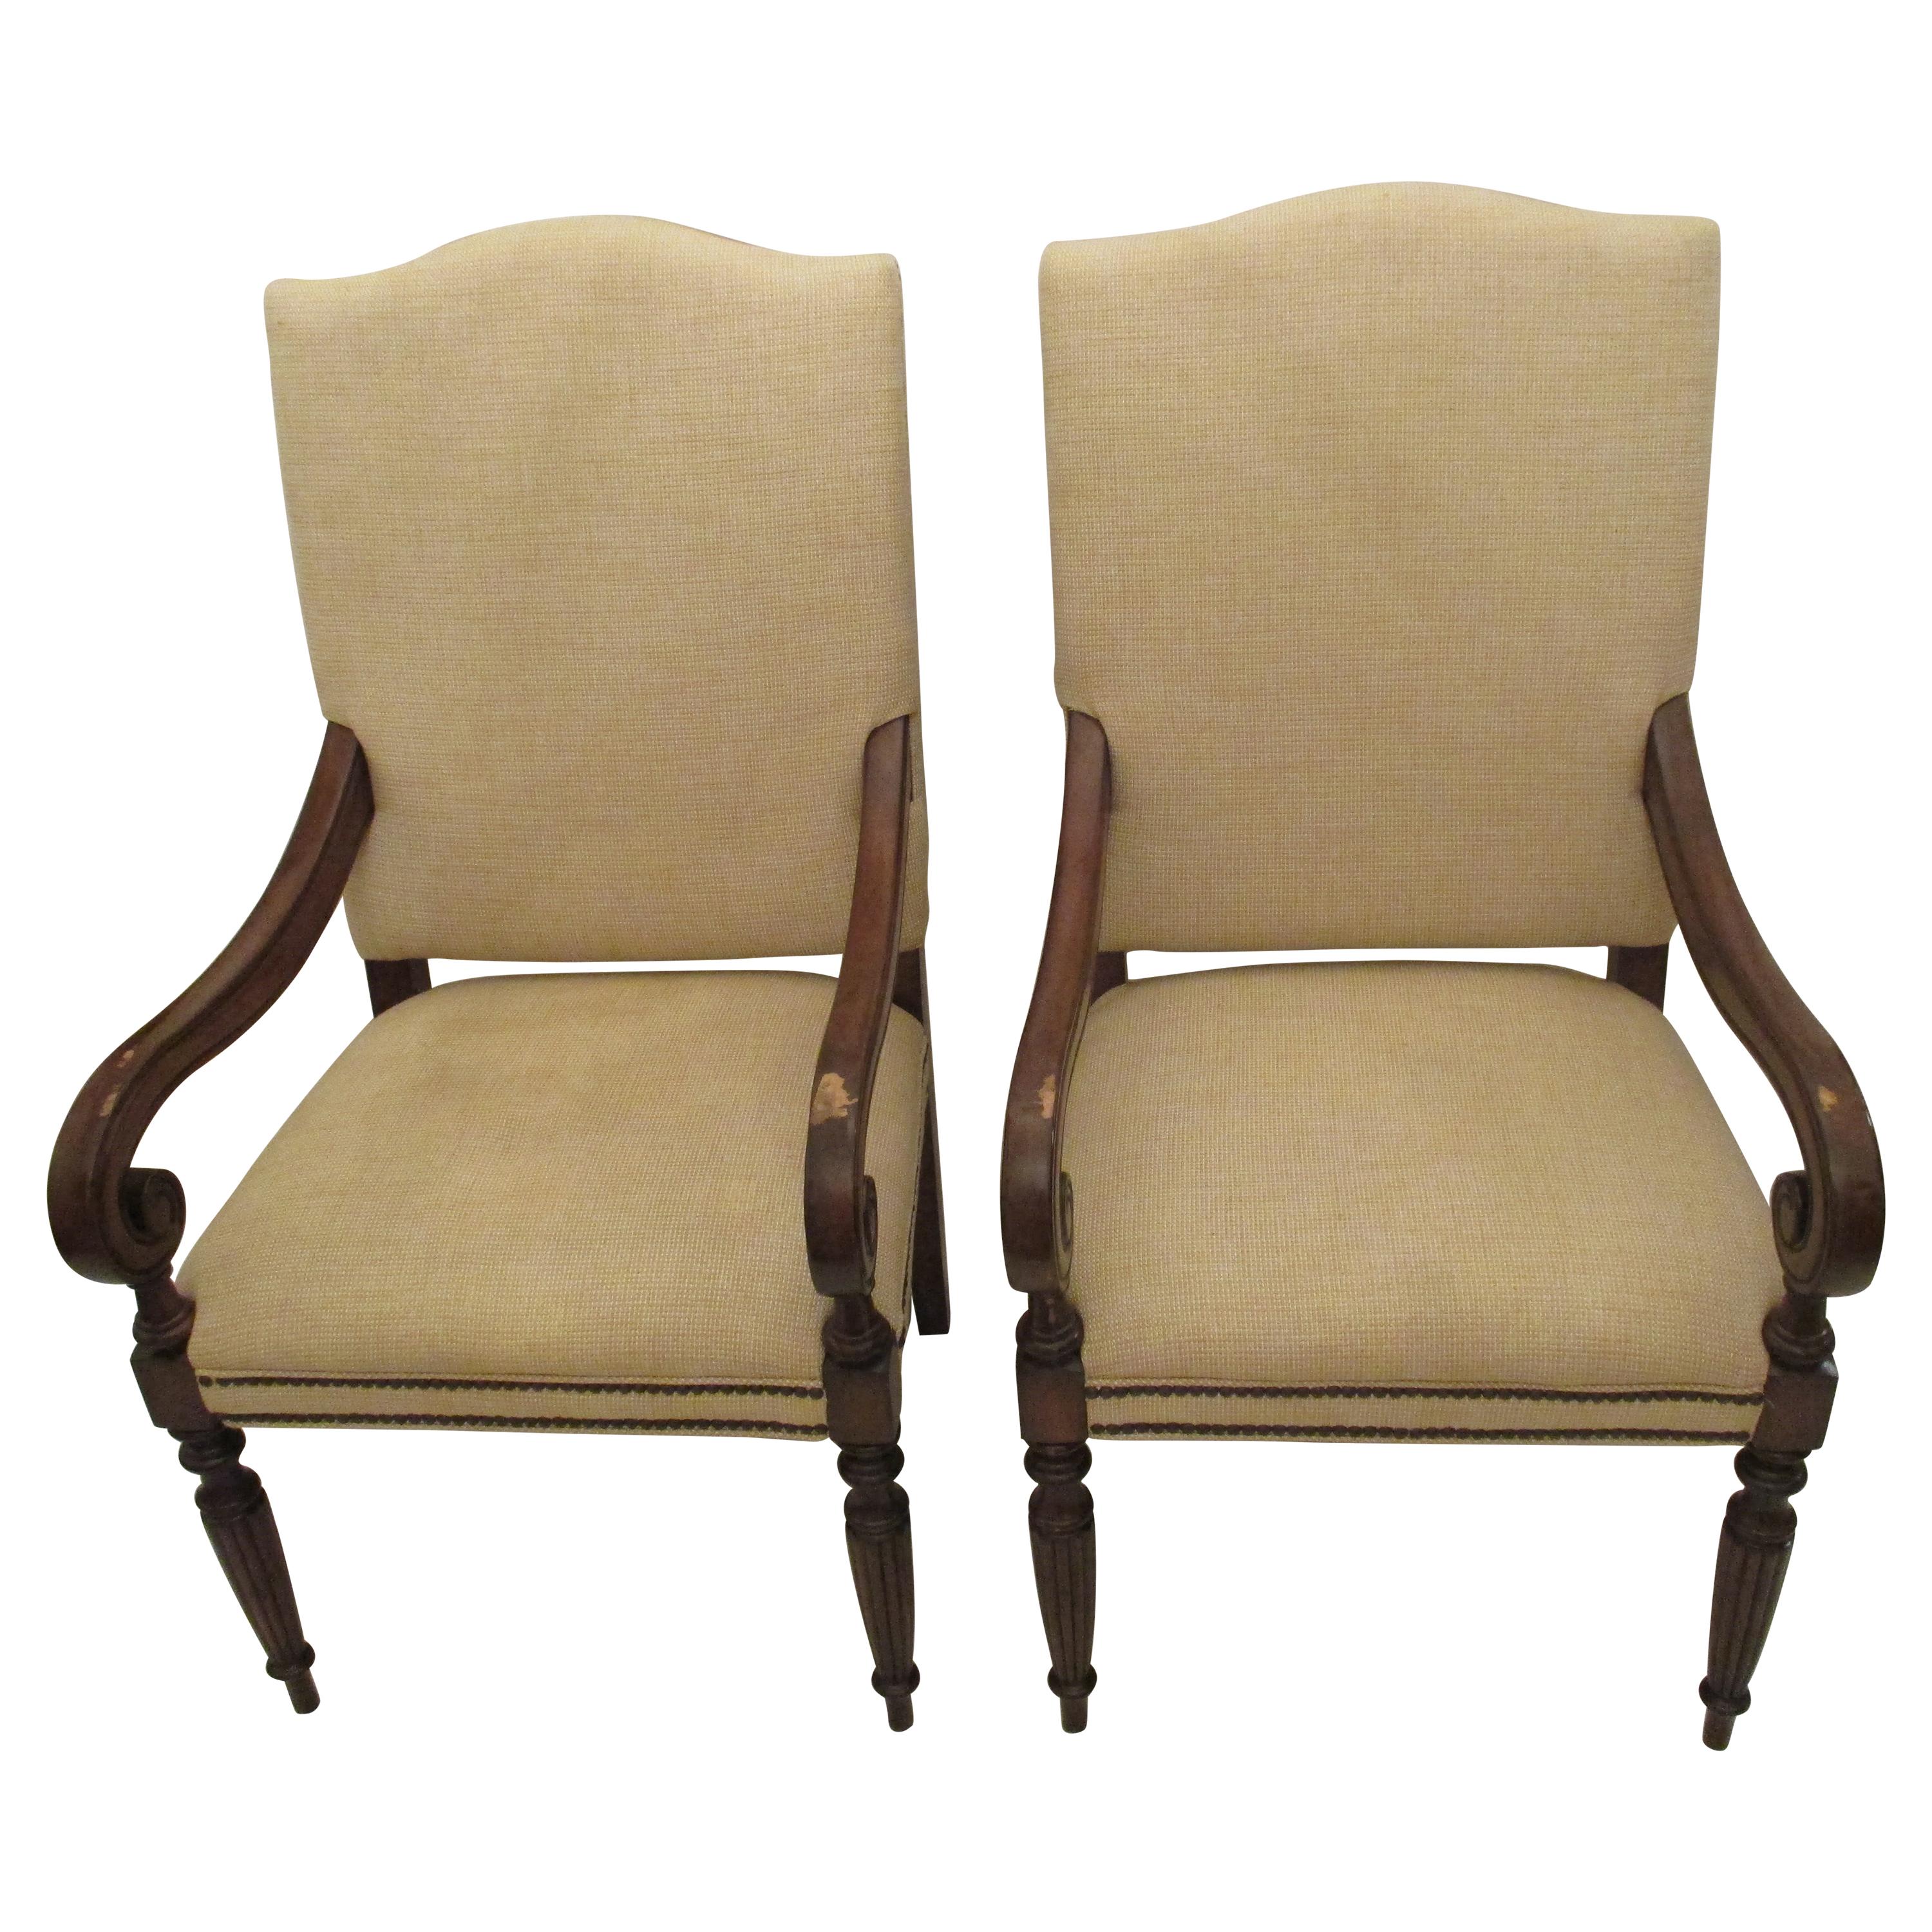 Pair of Upholstered Armchairs with Nailhead Trim For Sale